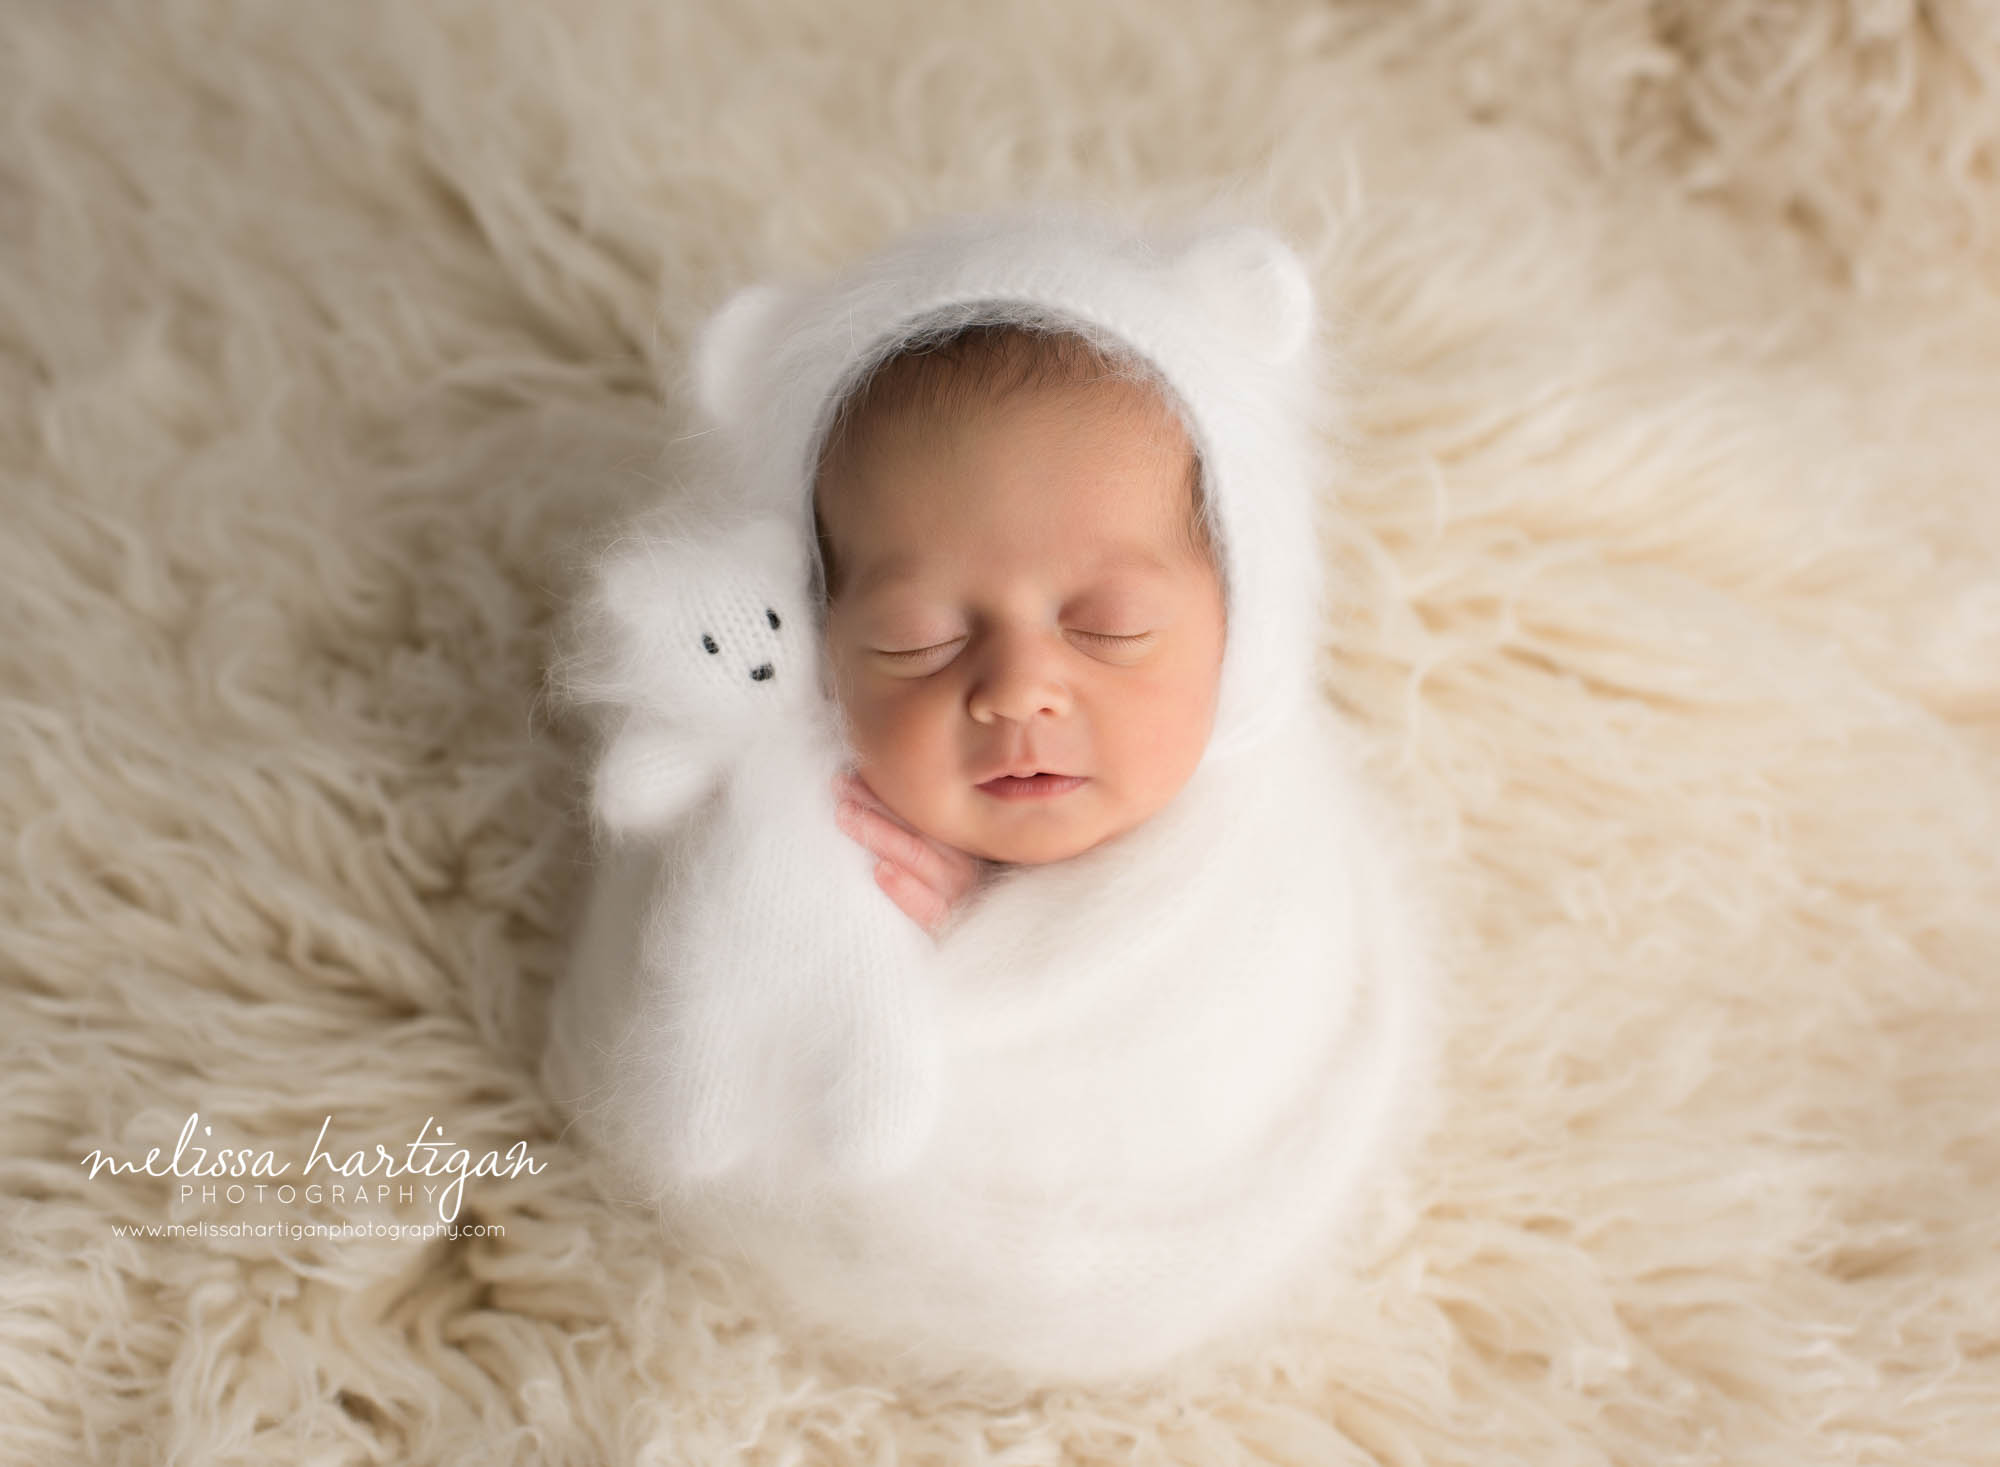 newborn baby girl wrapped in knitted wraped holding knitted teddy bear wearing matching knitted bear bonnet CT newborn Photography